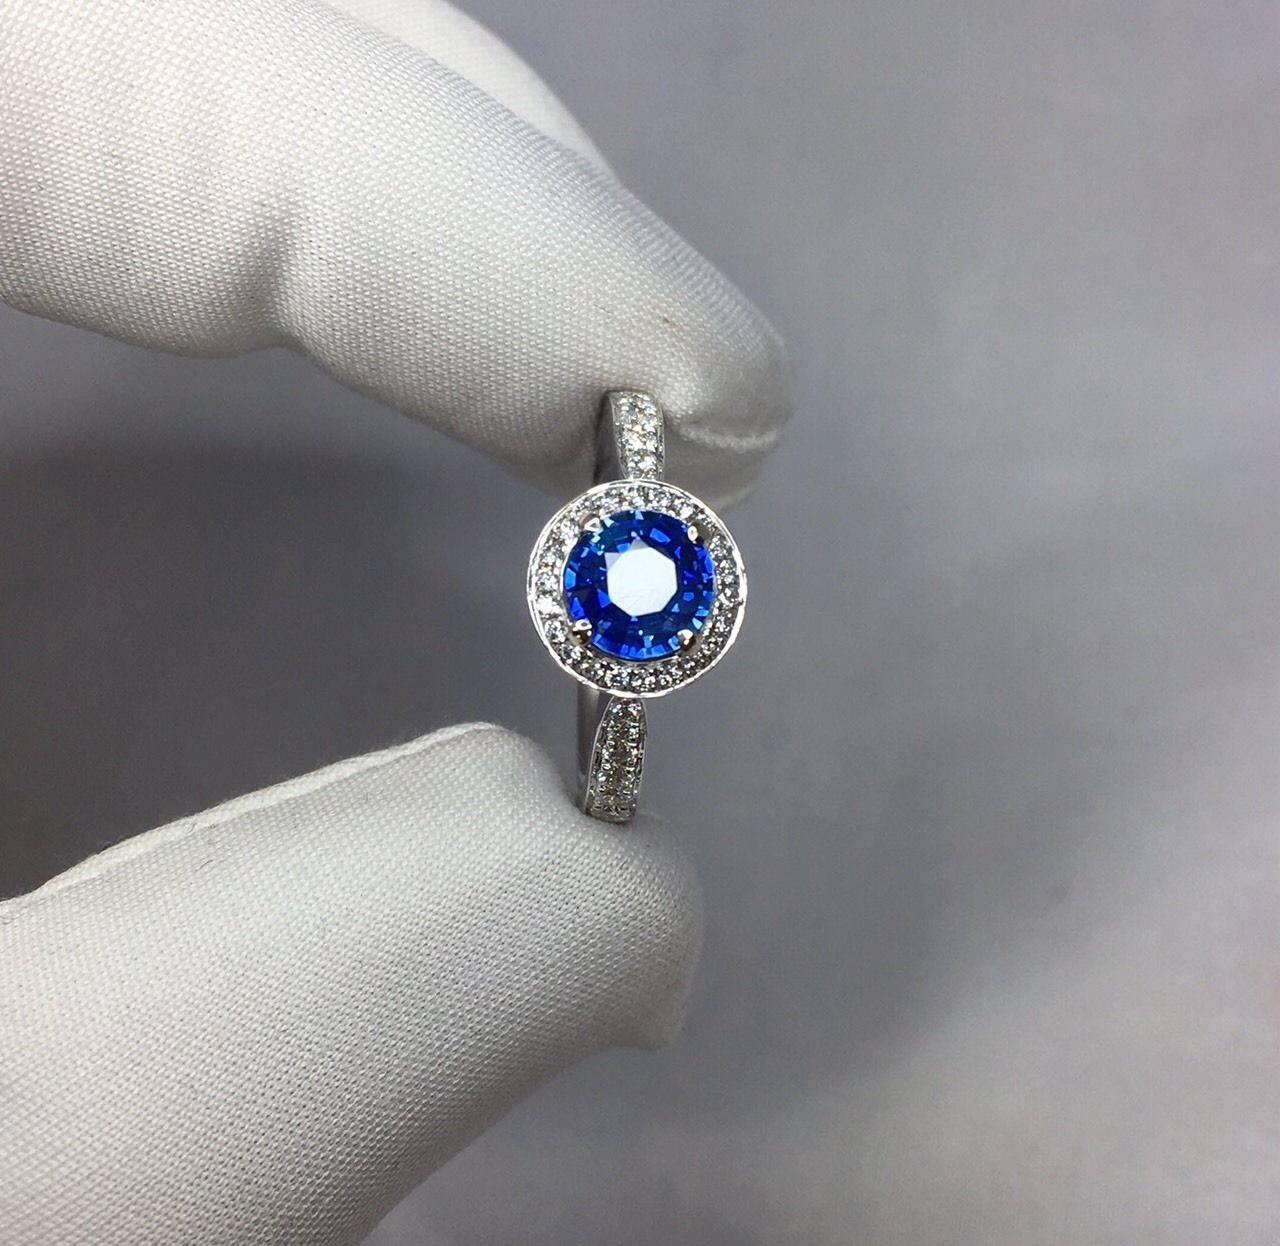 Stunning natural vivid blue Ceylon sapphire set in a fine 18k white gold diamond halo ring.  

1.00 carat centre sapphire with fine cornflower blue colour and excellent clarity.

Ceylon in origin, source of some of the worlds best quality